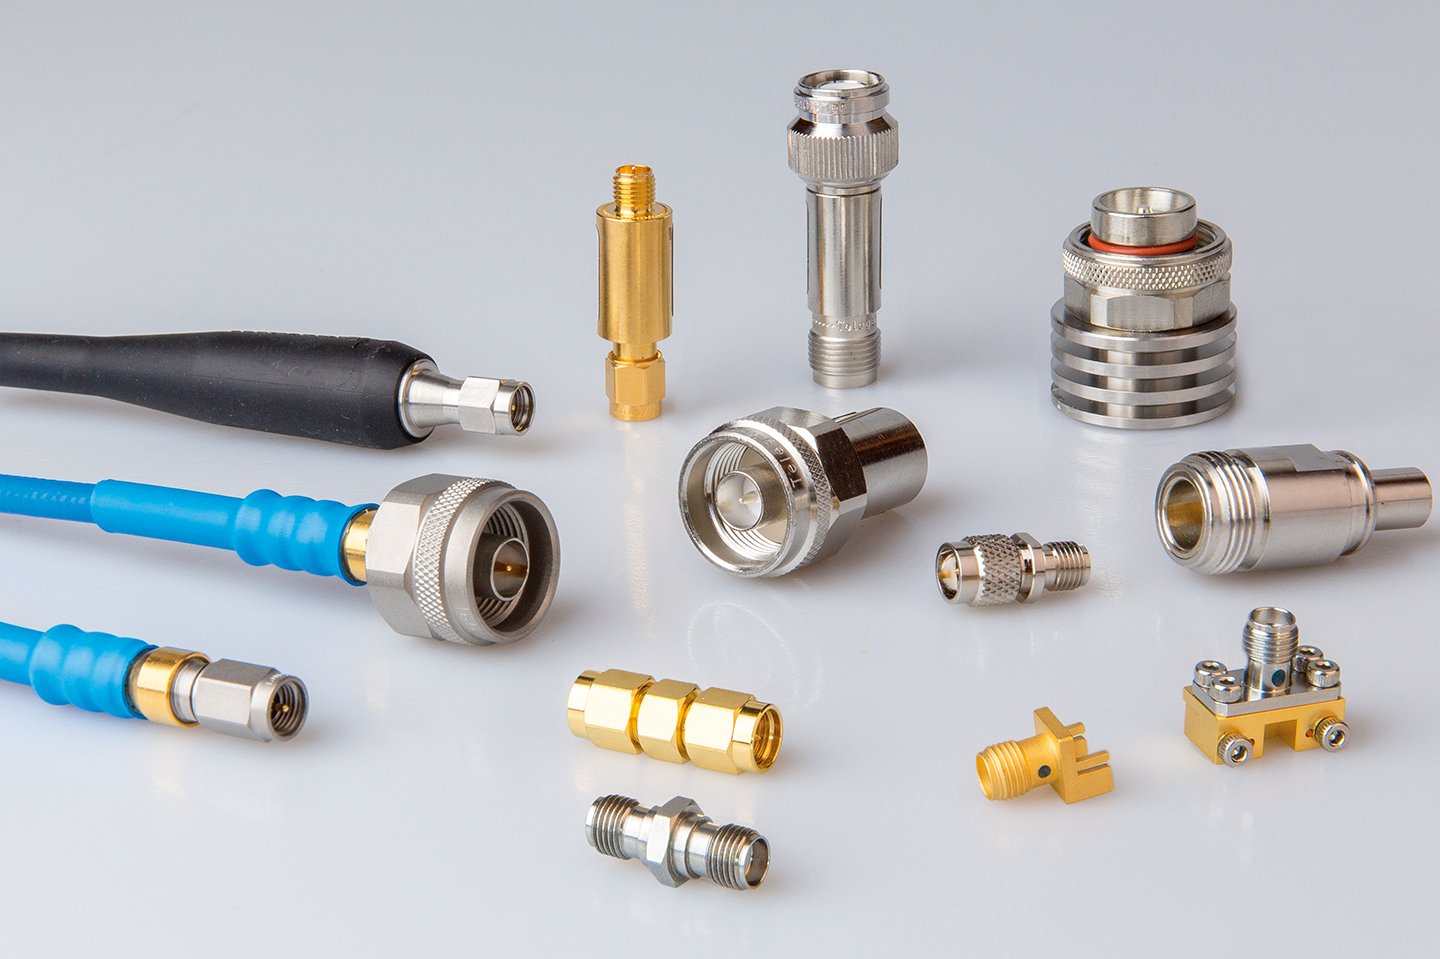 RF Components for Test & Measurement